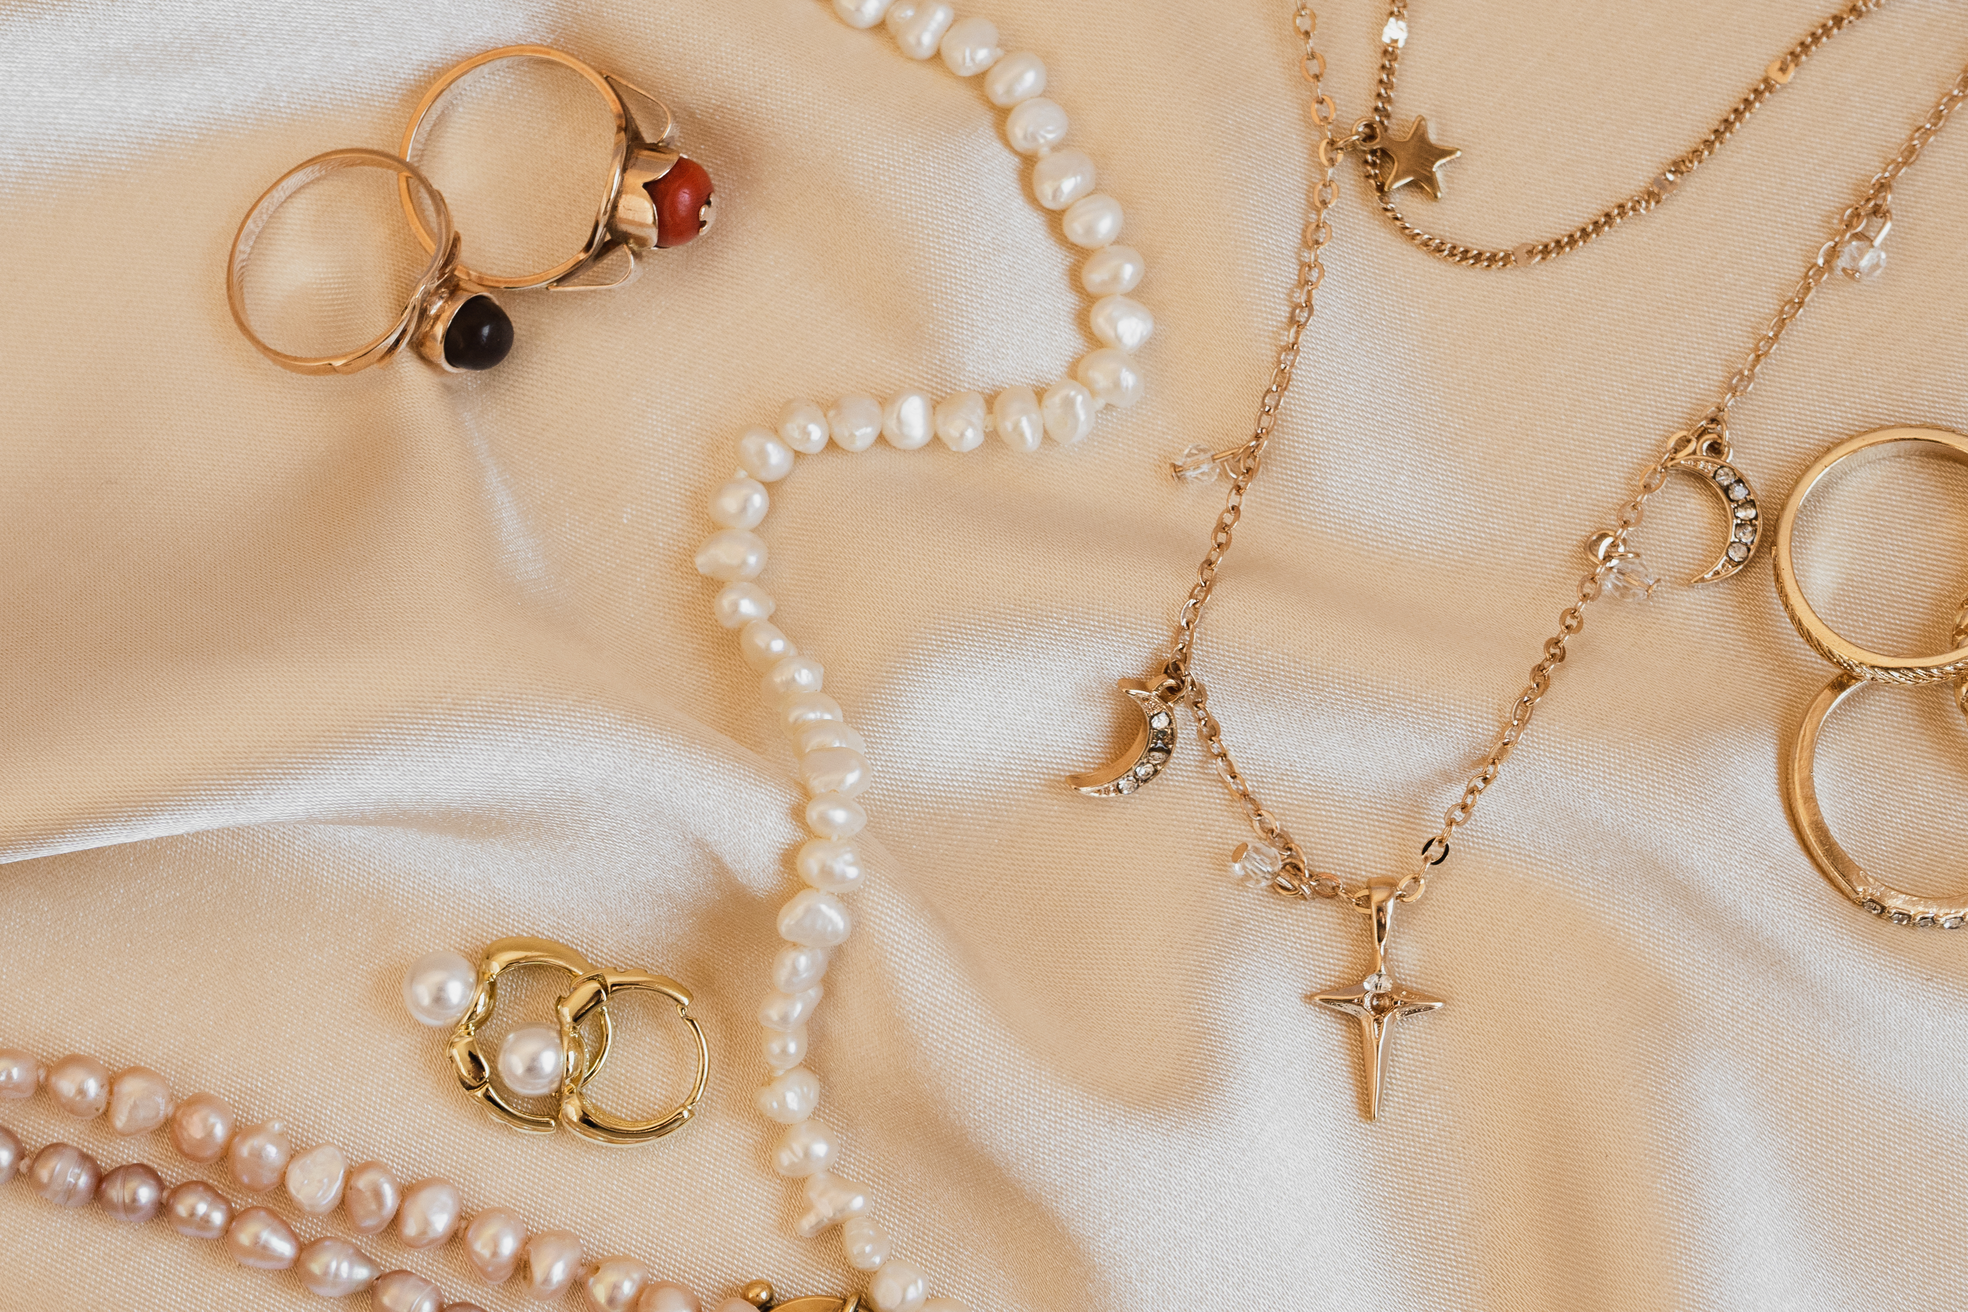 How to Clean Your Jewelry at Home Without a Professional